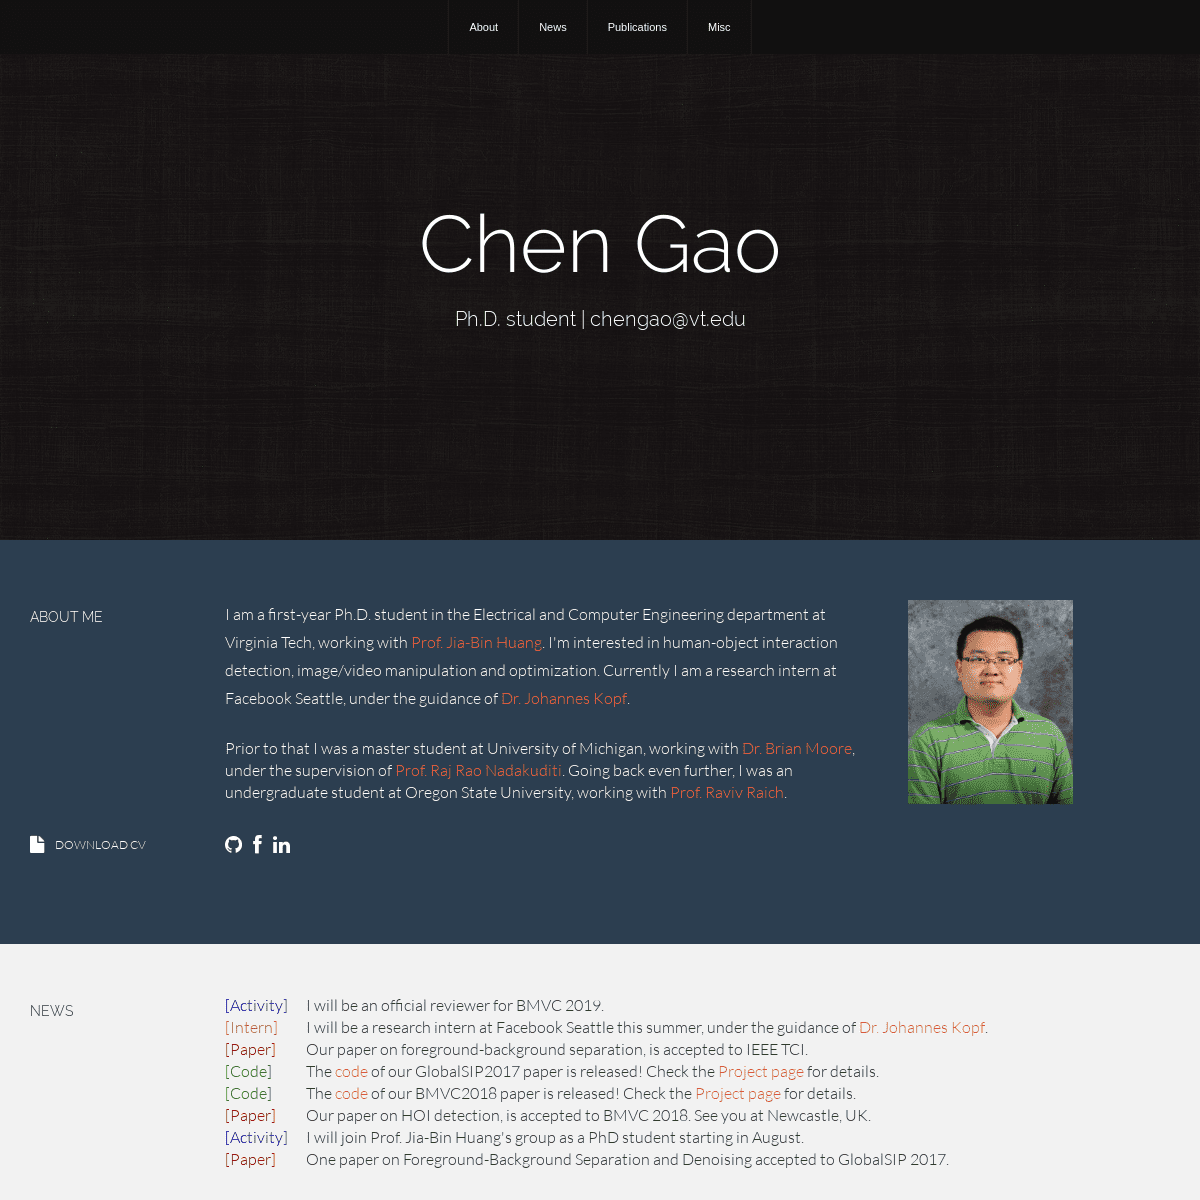 Chen - Personal page